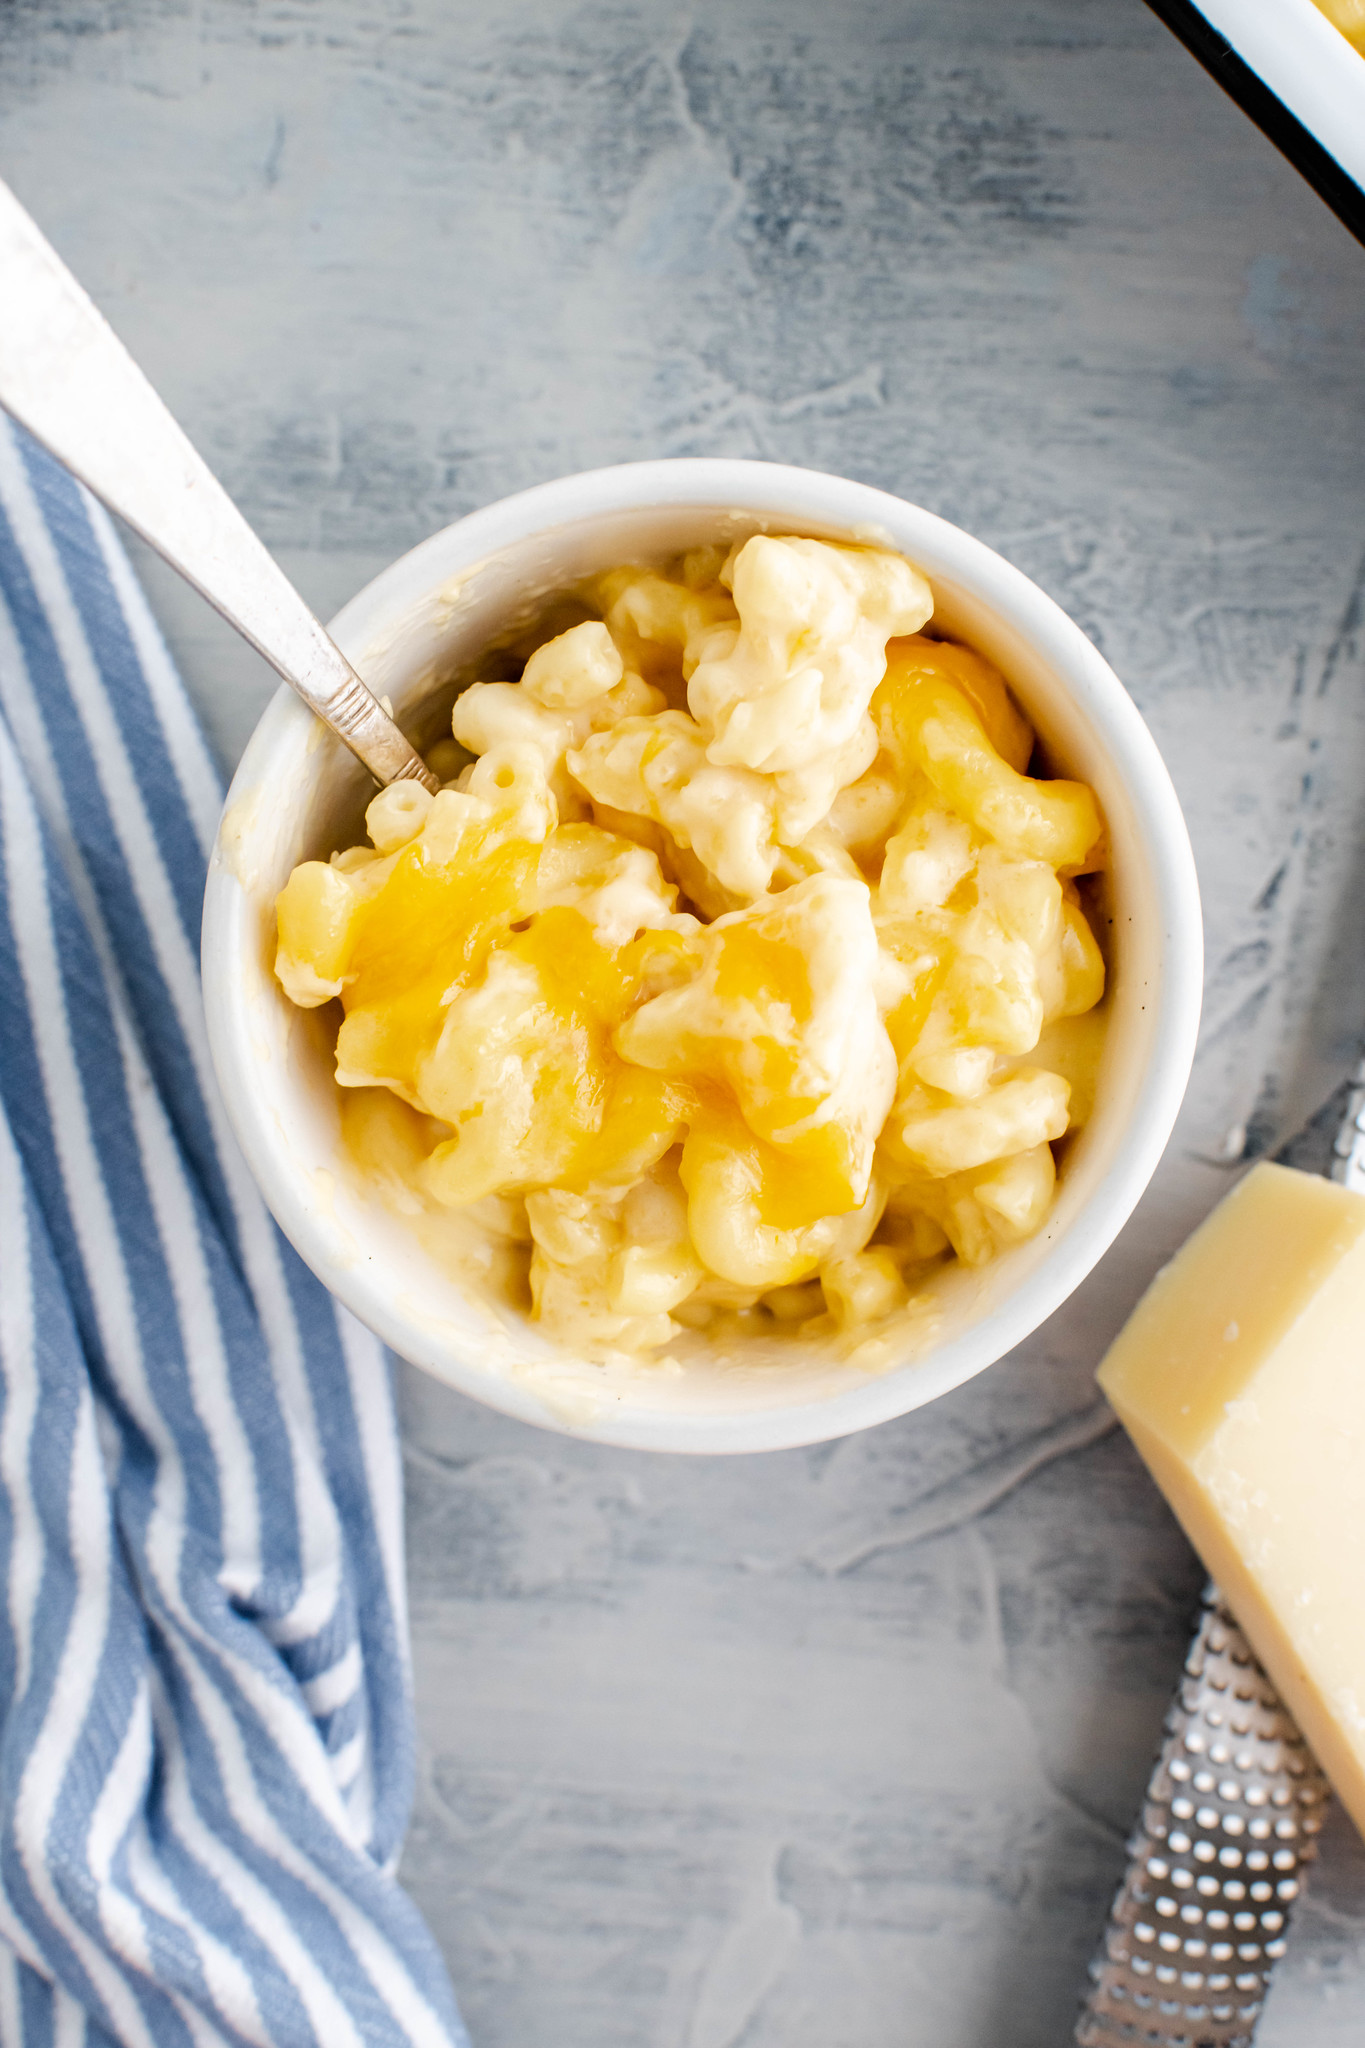 Pale grey bowl of macaroni and cheese.